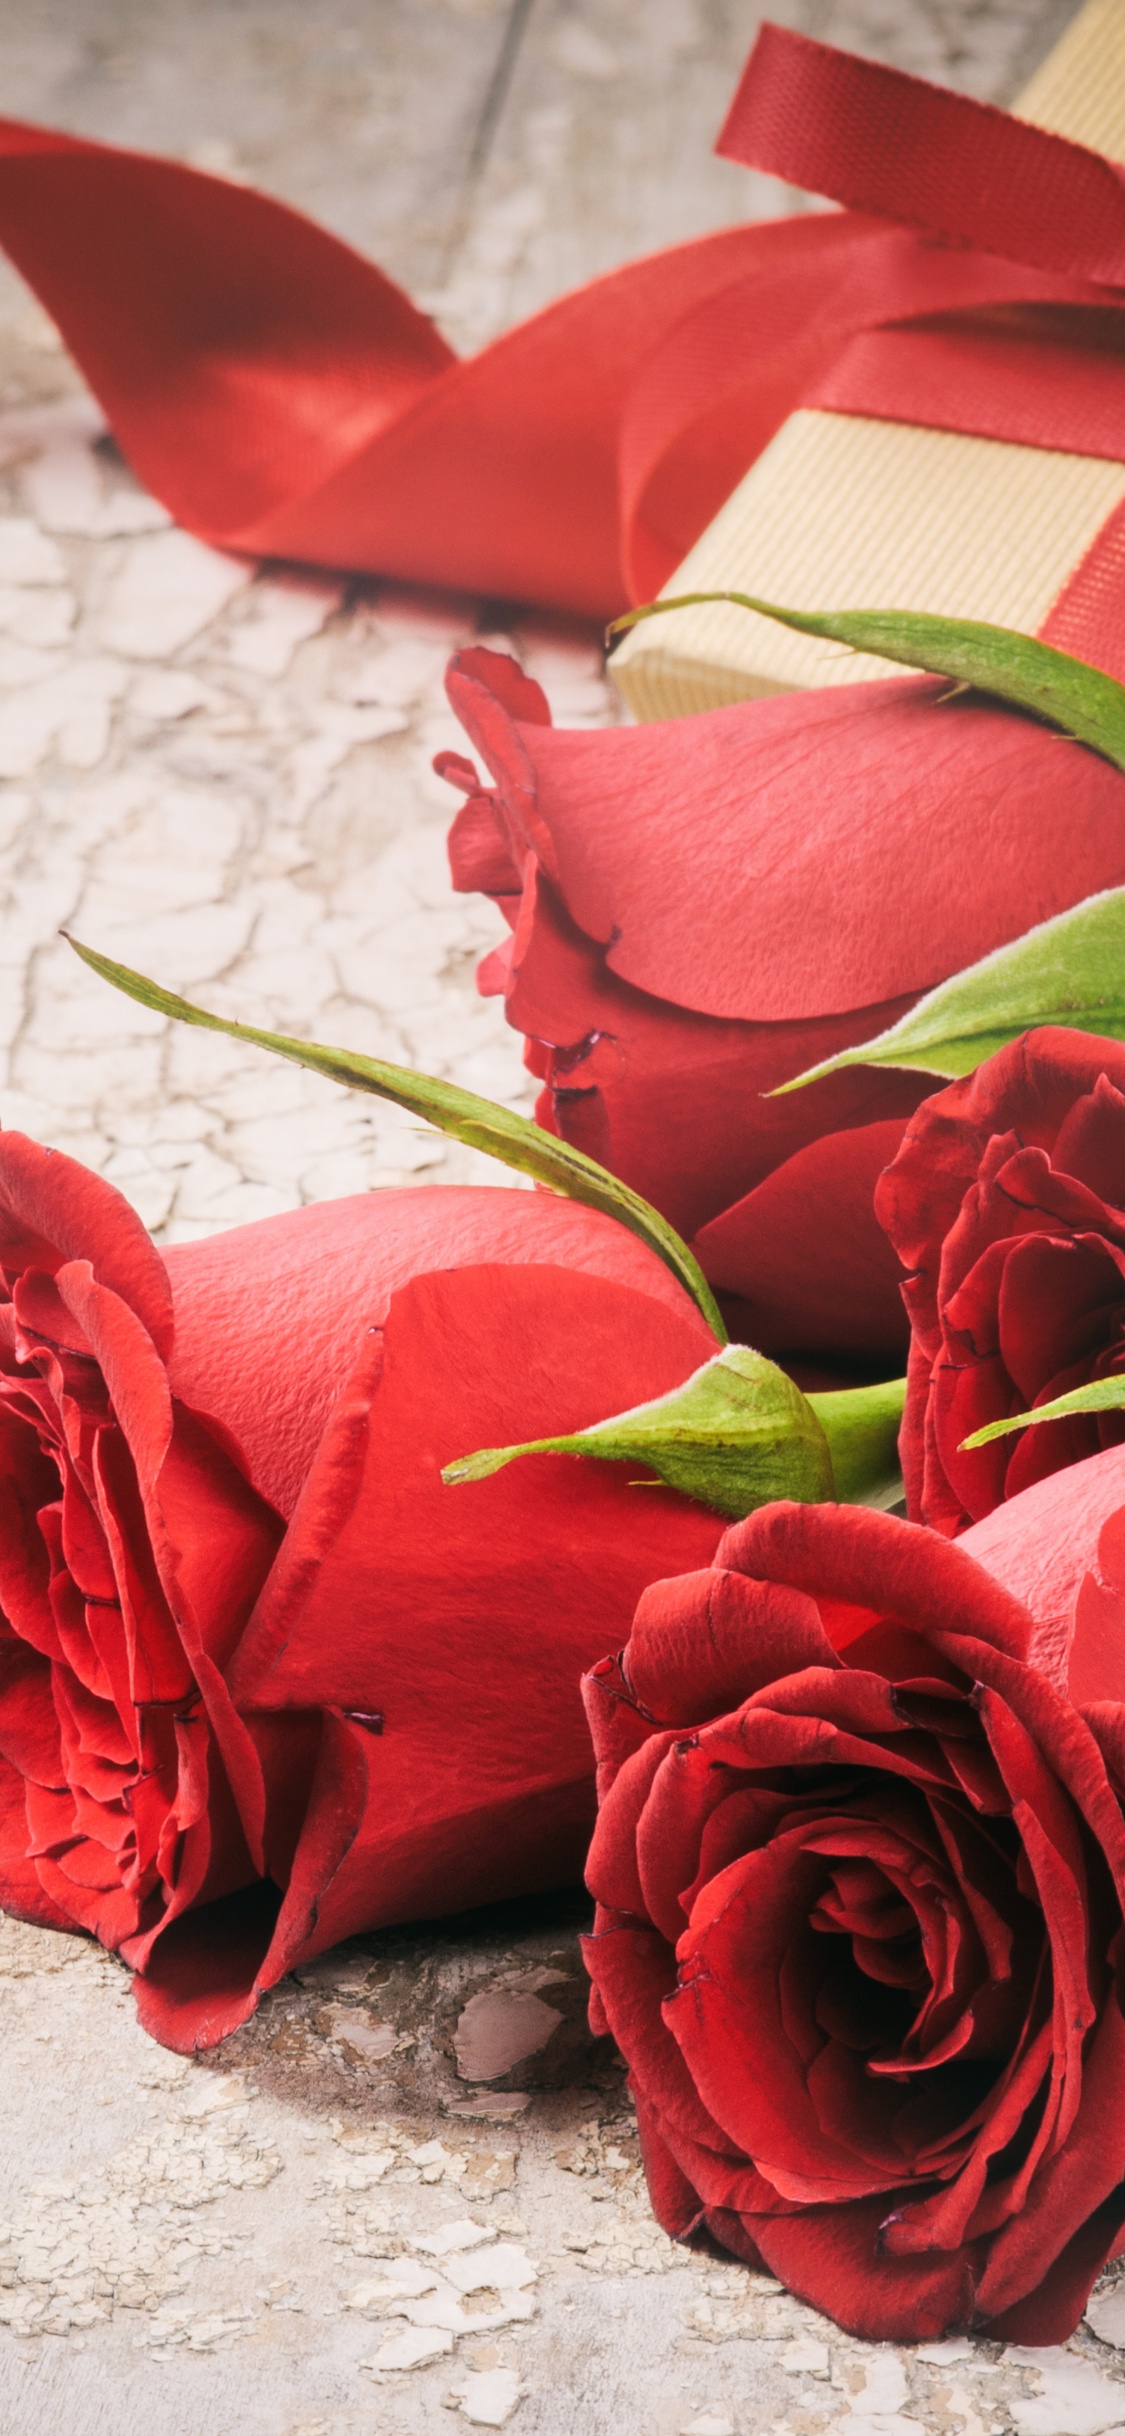 Roses Rouges Sur Textile Blanc. Wallpaper in 1125x2436 Resolution